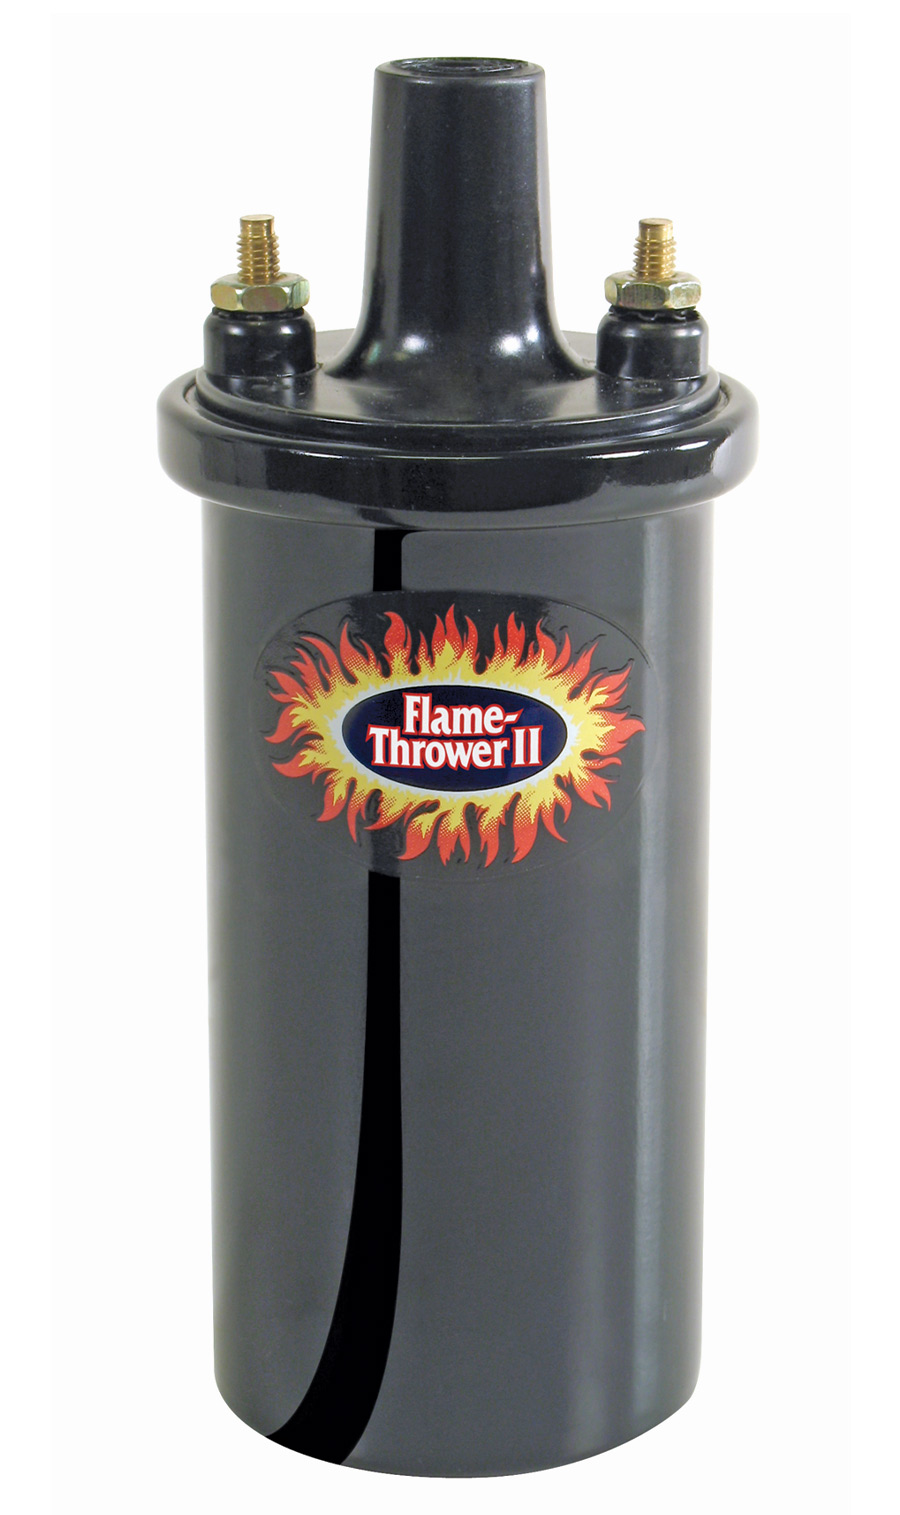 Flame Thrower II coil (PN 45011)